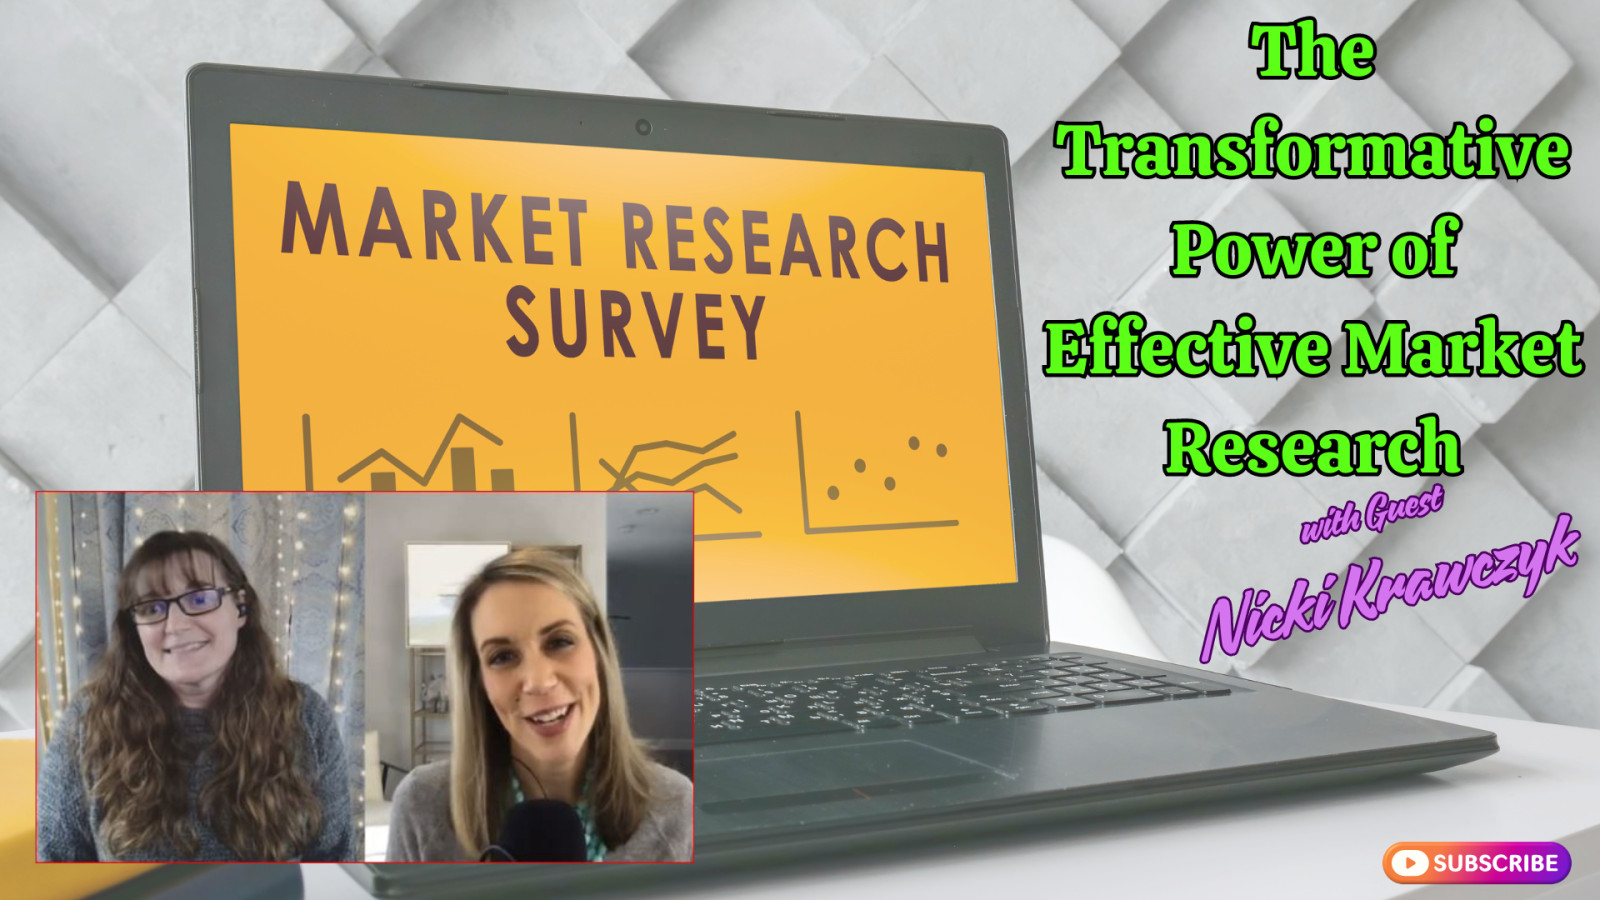 The Transformative Power of Effective Market Research with Guest Nicki Krawczyk